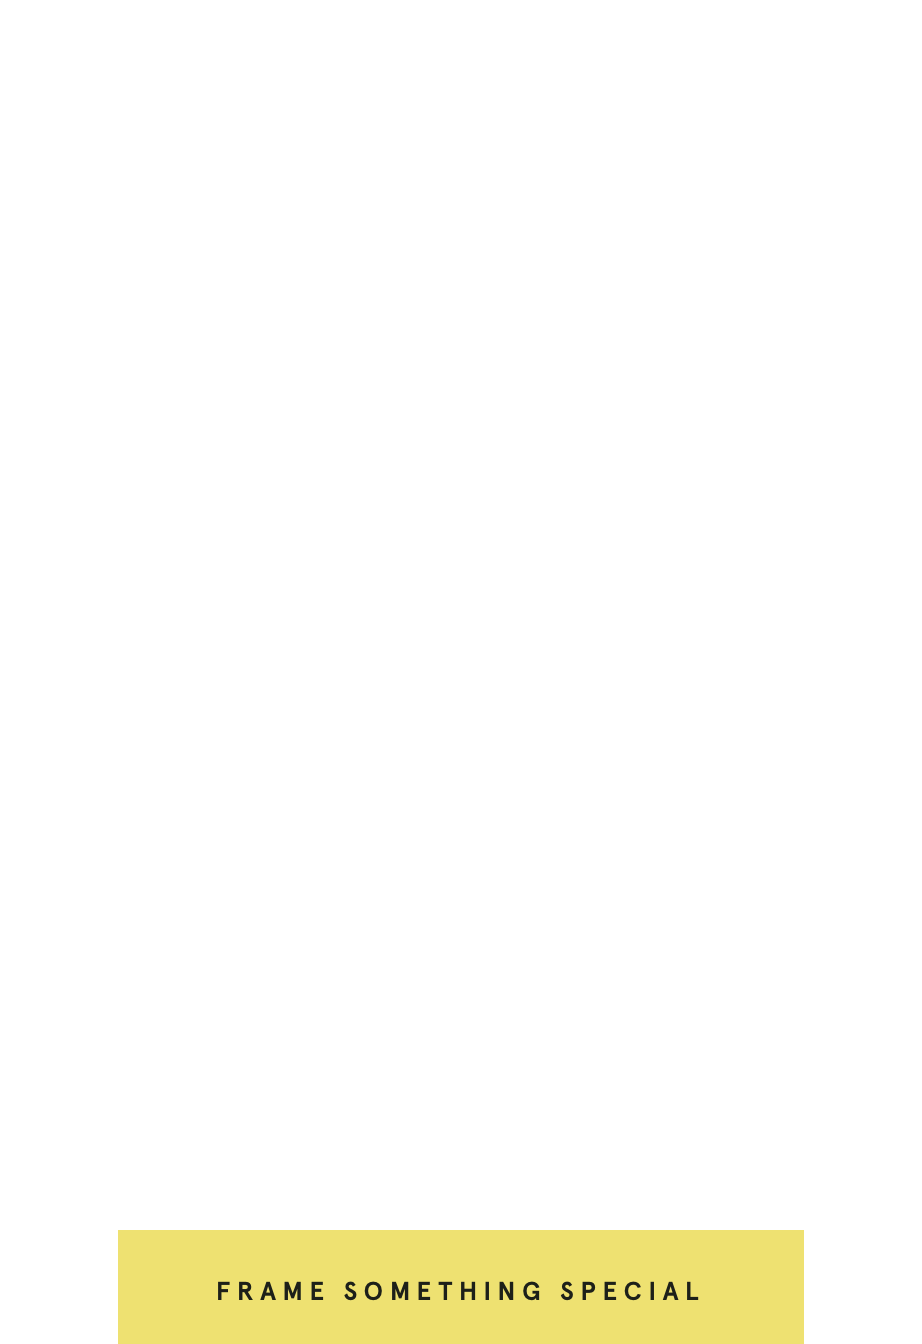 Love to the moon. Halibut Cove. Ping-pong paddle. 12 rainbows. Ferrari garage. Elio & Oliver. Prize pumpkin.